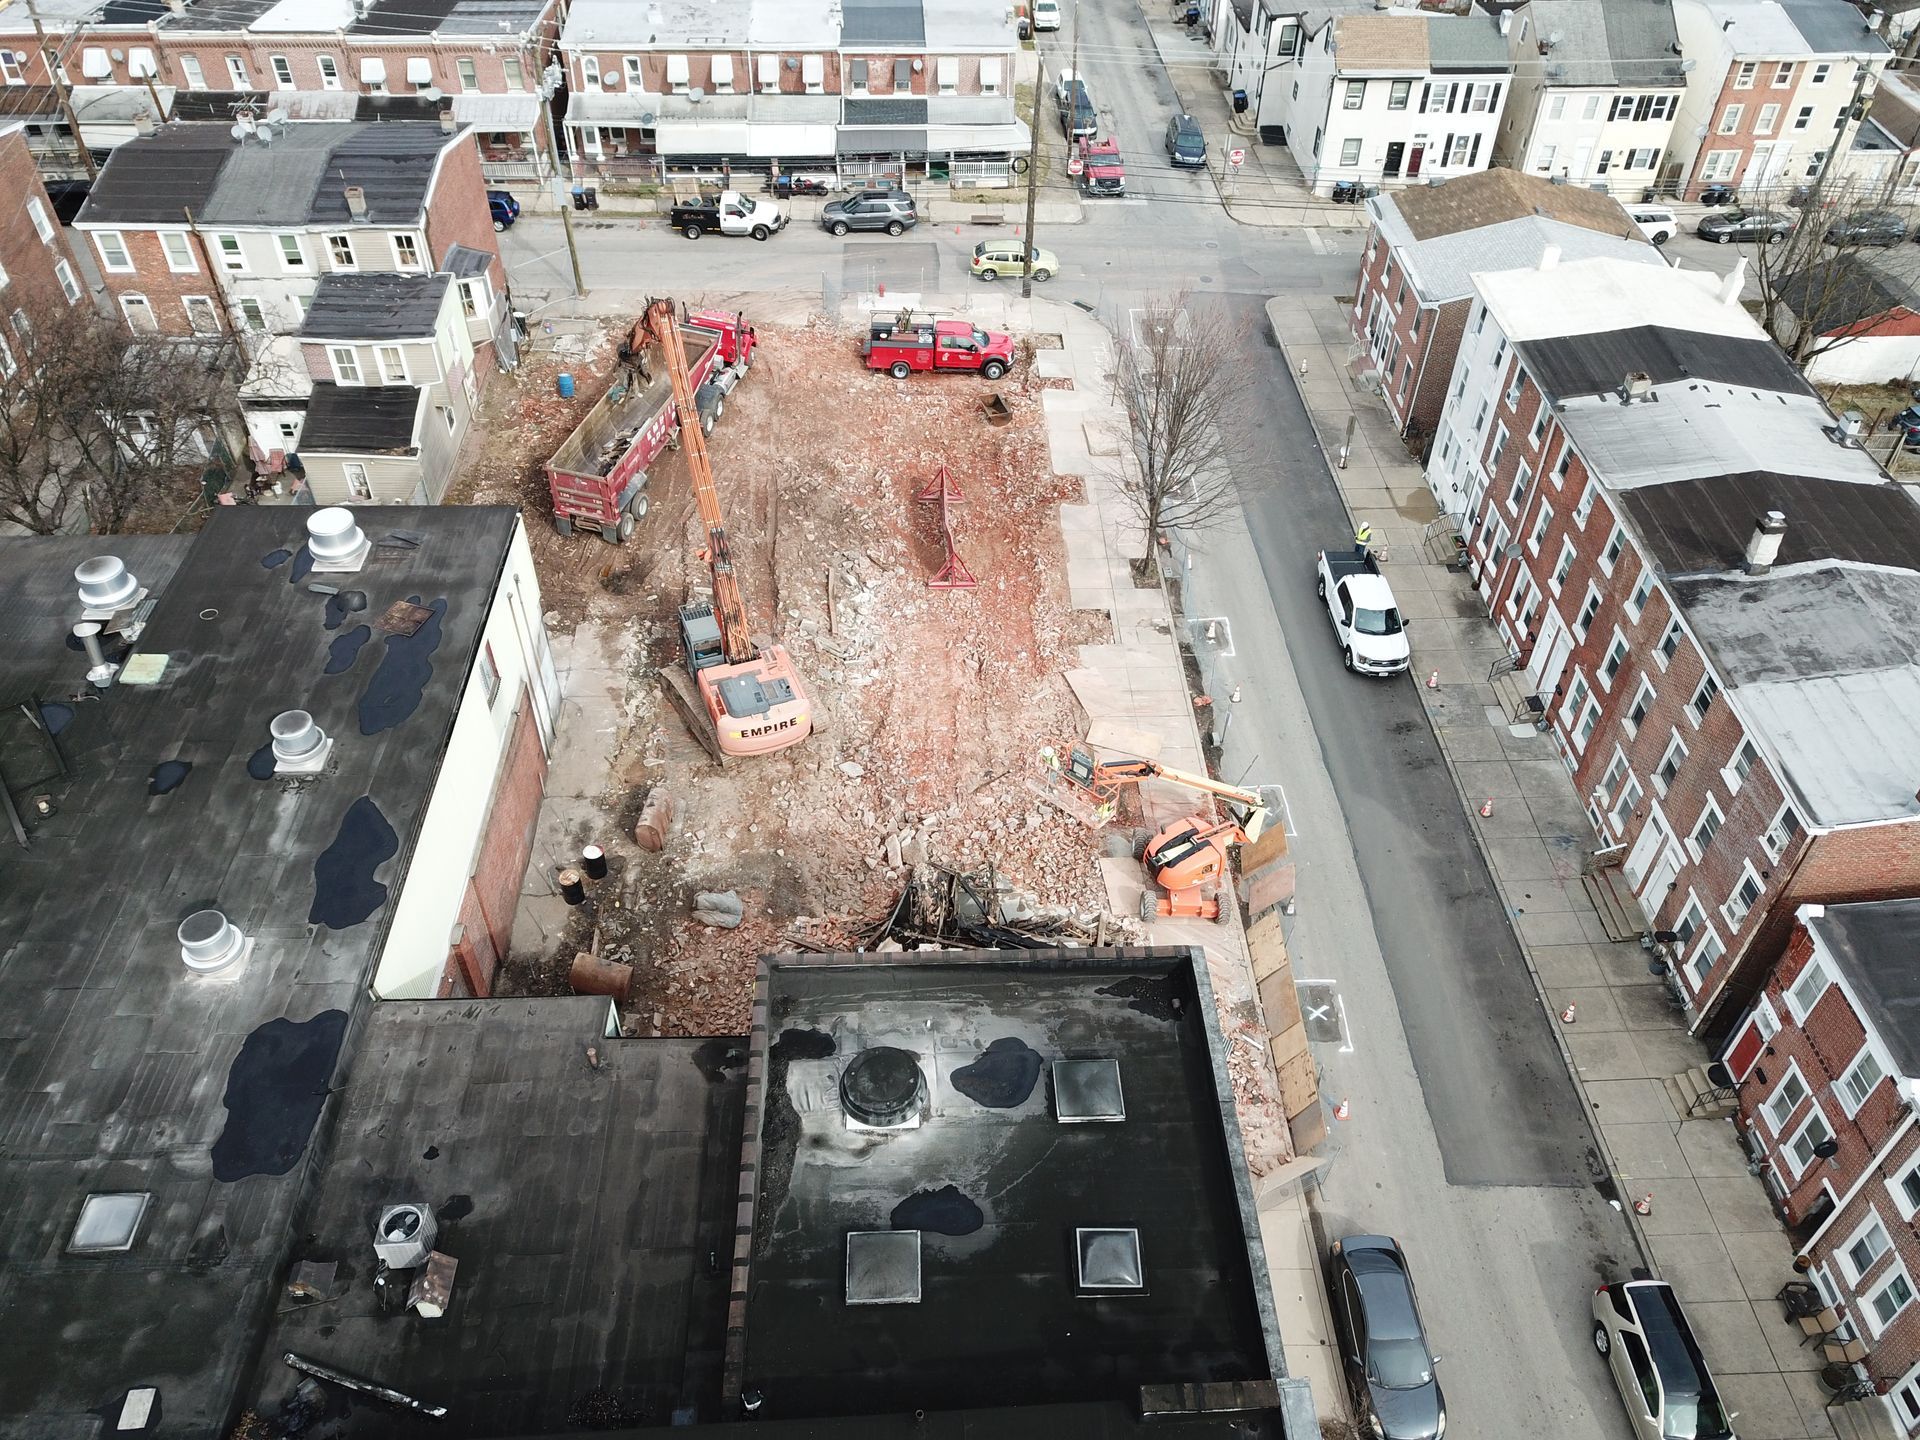 An aerial view of a construction site in a city